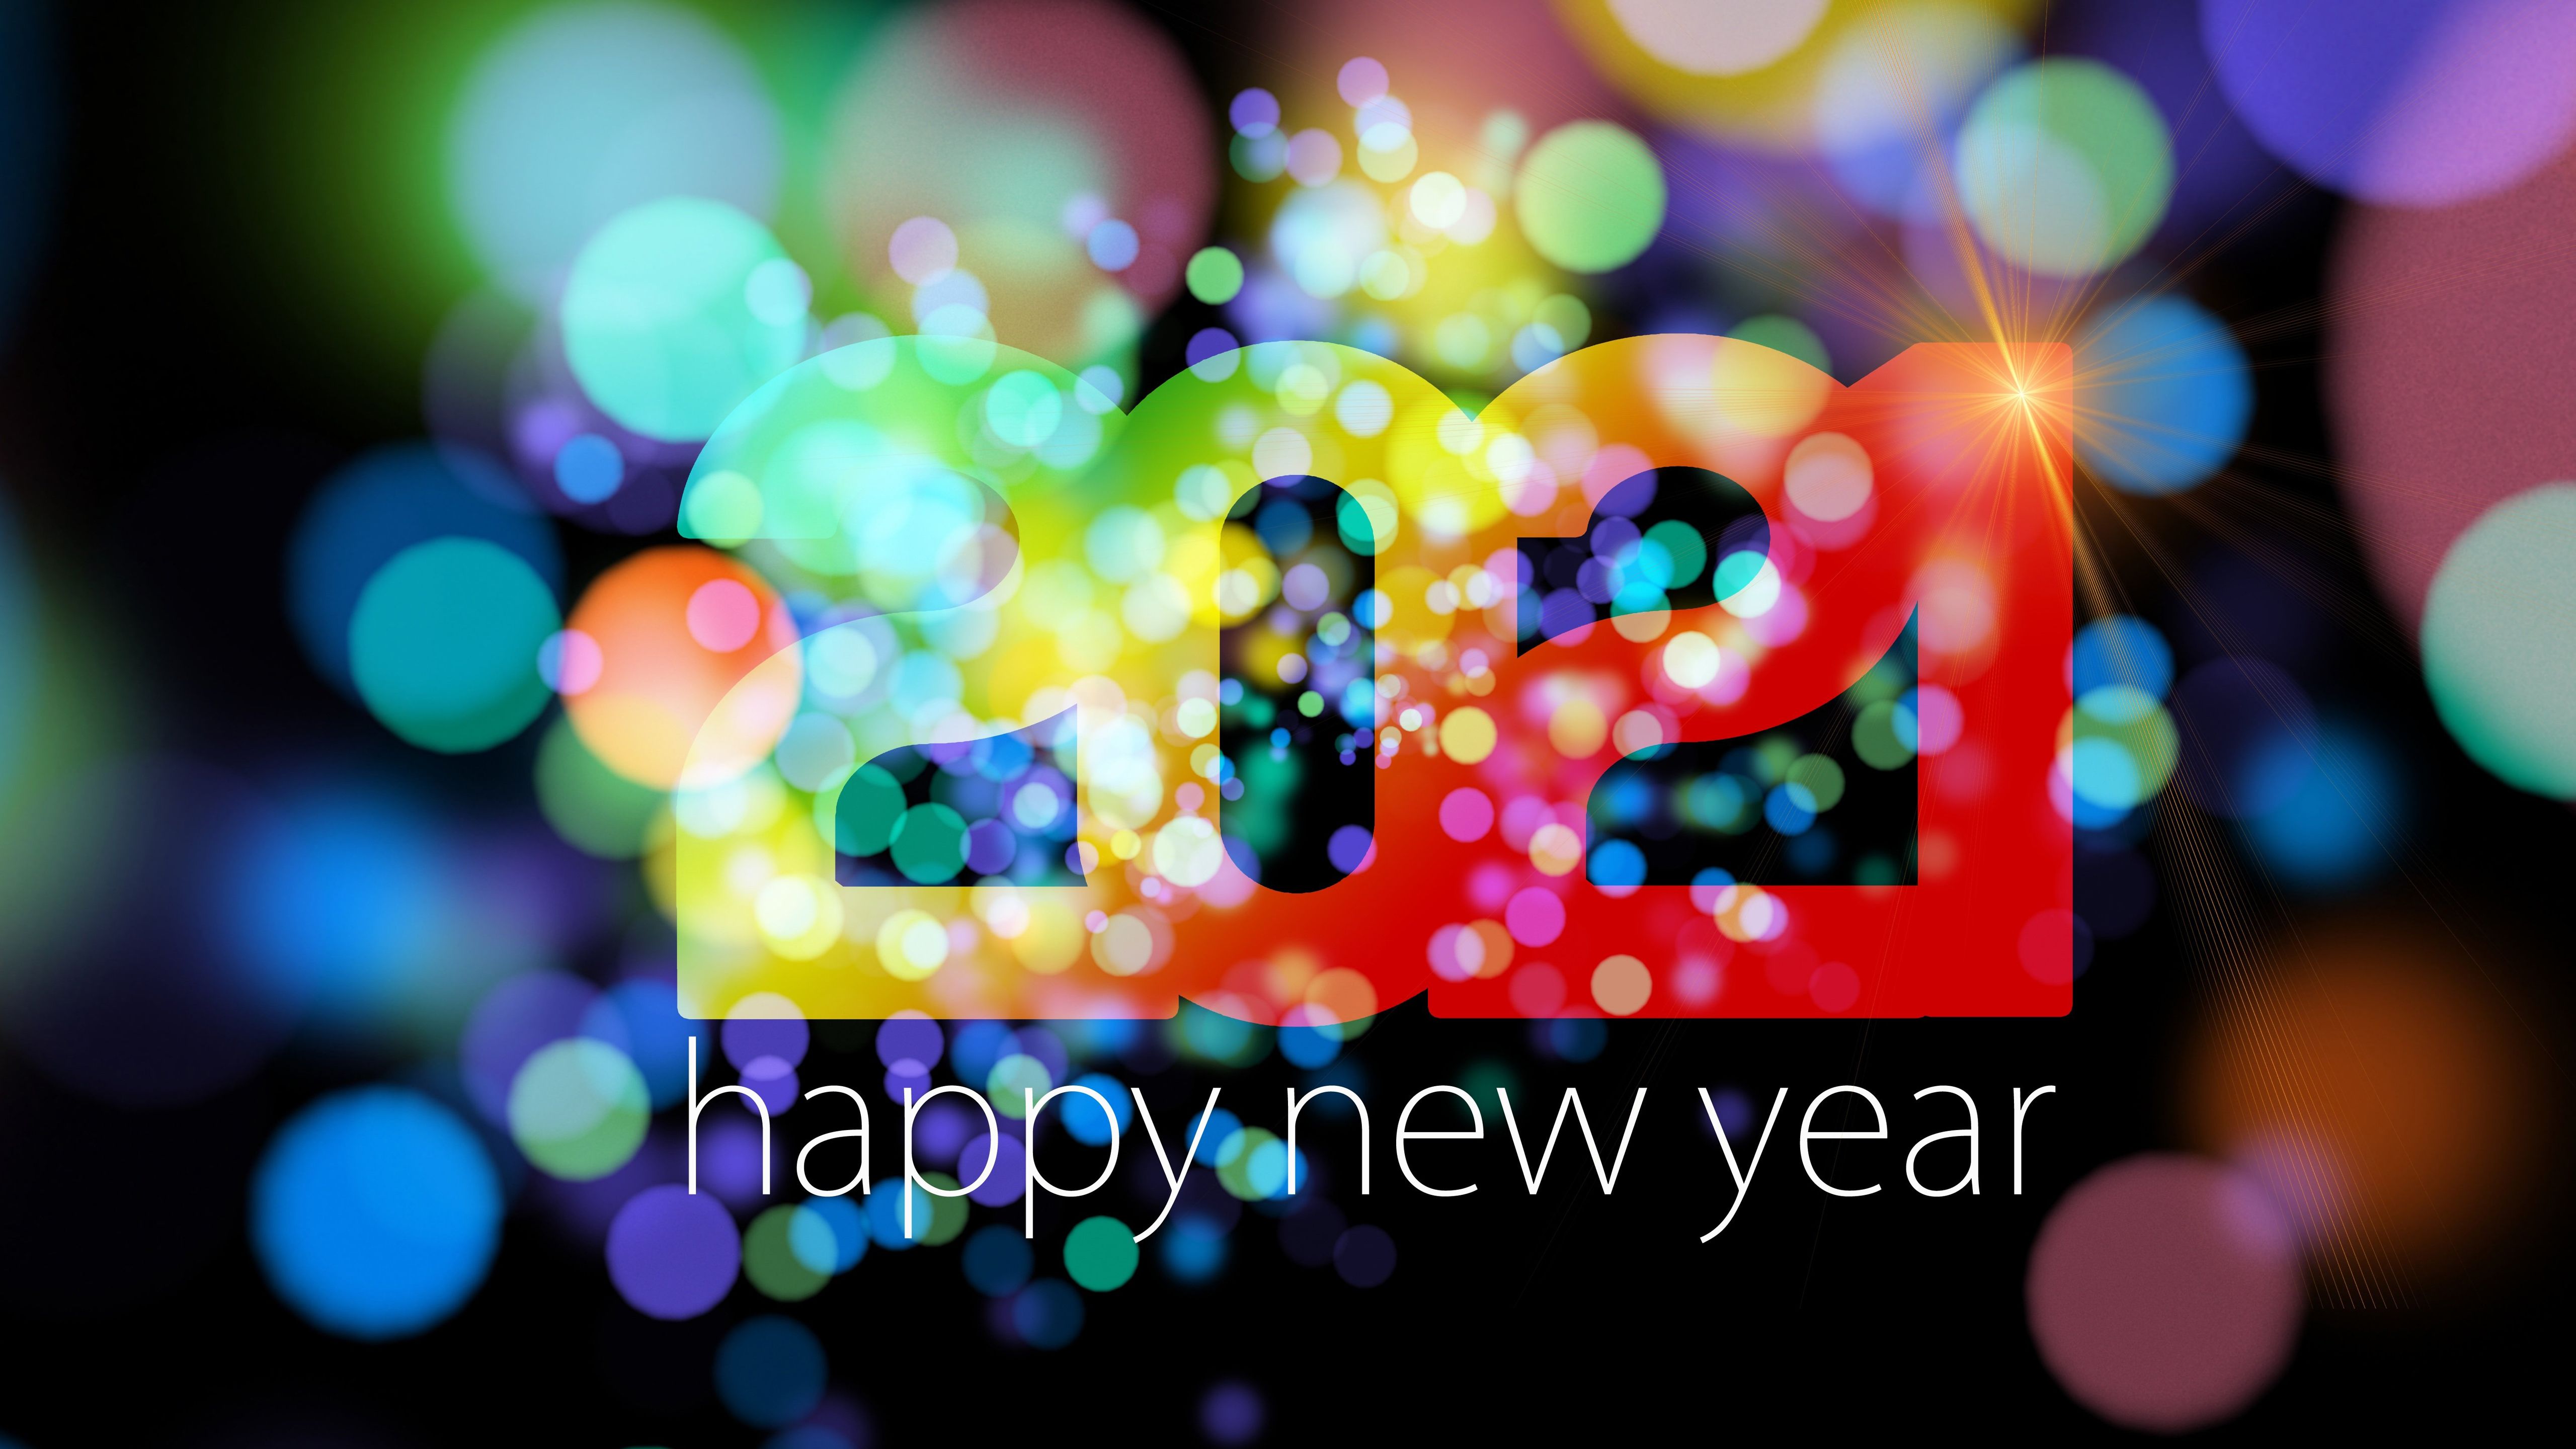 Happy New Year 2021 With Colorful Circles 4K 5K HD Happy New Year 2021 Wallpaper